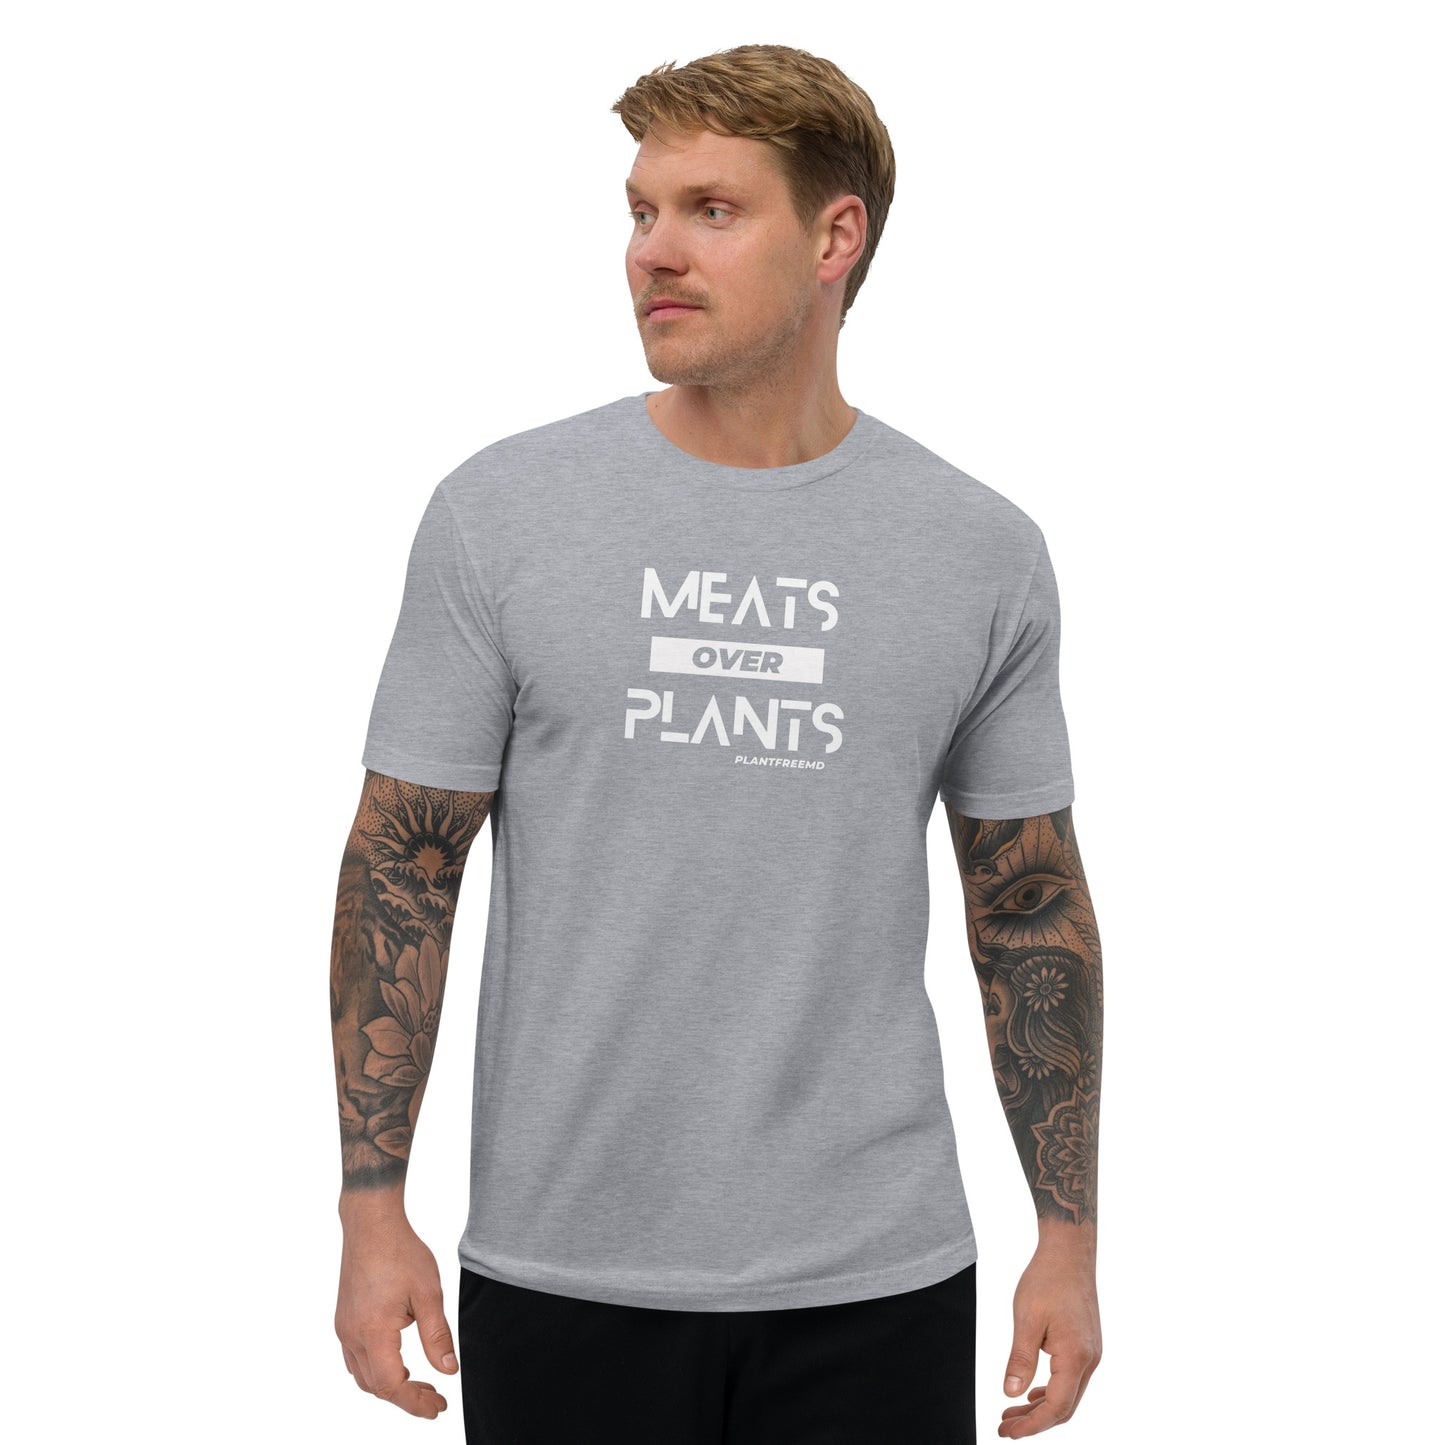 Meats Over Plants Men's Fitted T-shirt Light